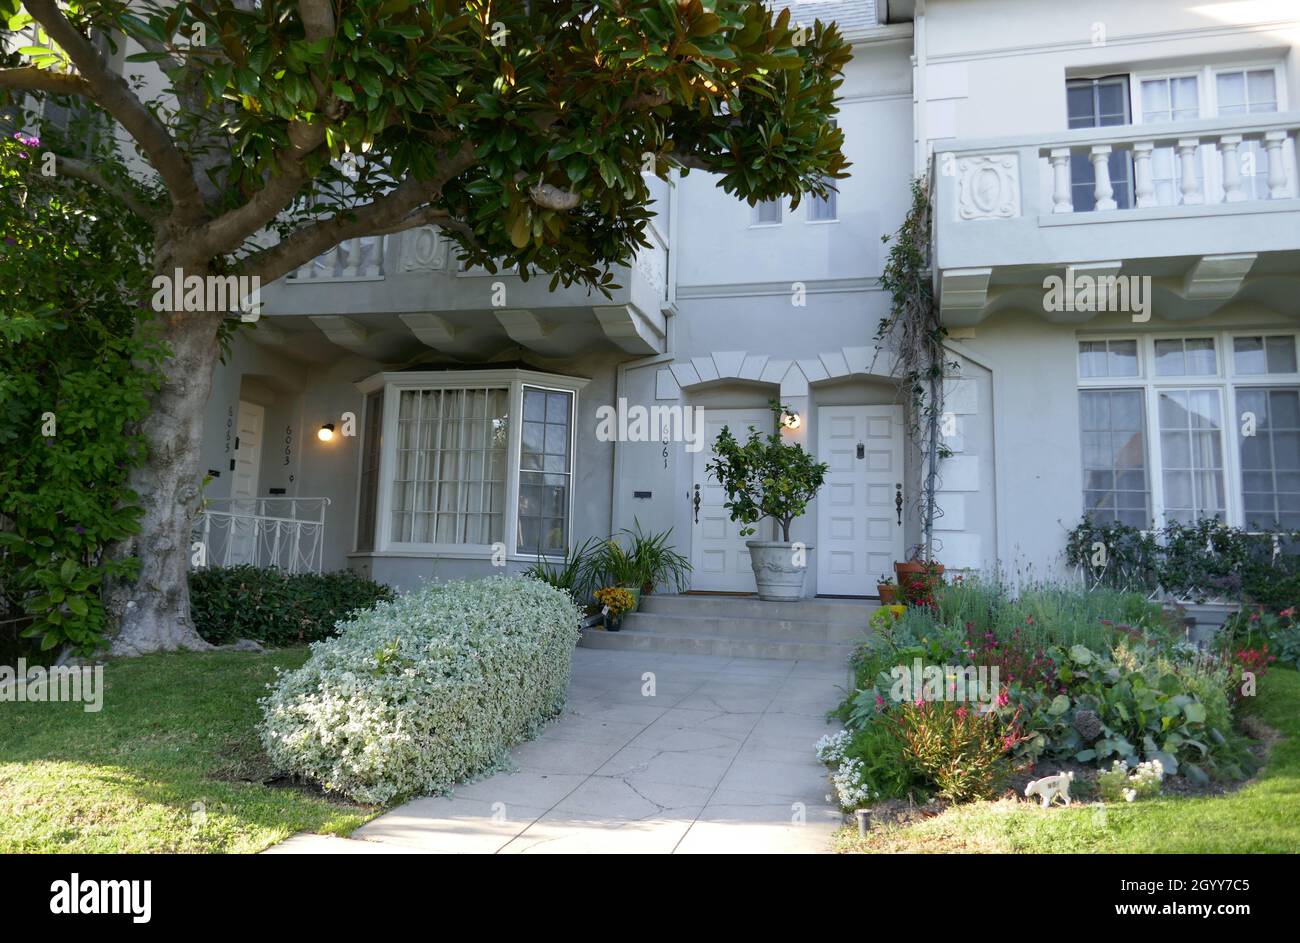 Los Angeles, California, USA 30th September 2021 A general view of atmosphere of Singer Madonna and actor Sean Penn's former home/residenceand Former home of Marilyn Monroe, Greta Garbo and Marlene Dietrich on September 30, 2021 in Los Angeles, California, USA. Photo by Barry King/Alamy Stock Photo Stock Photo